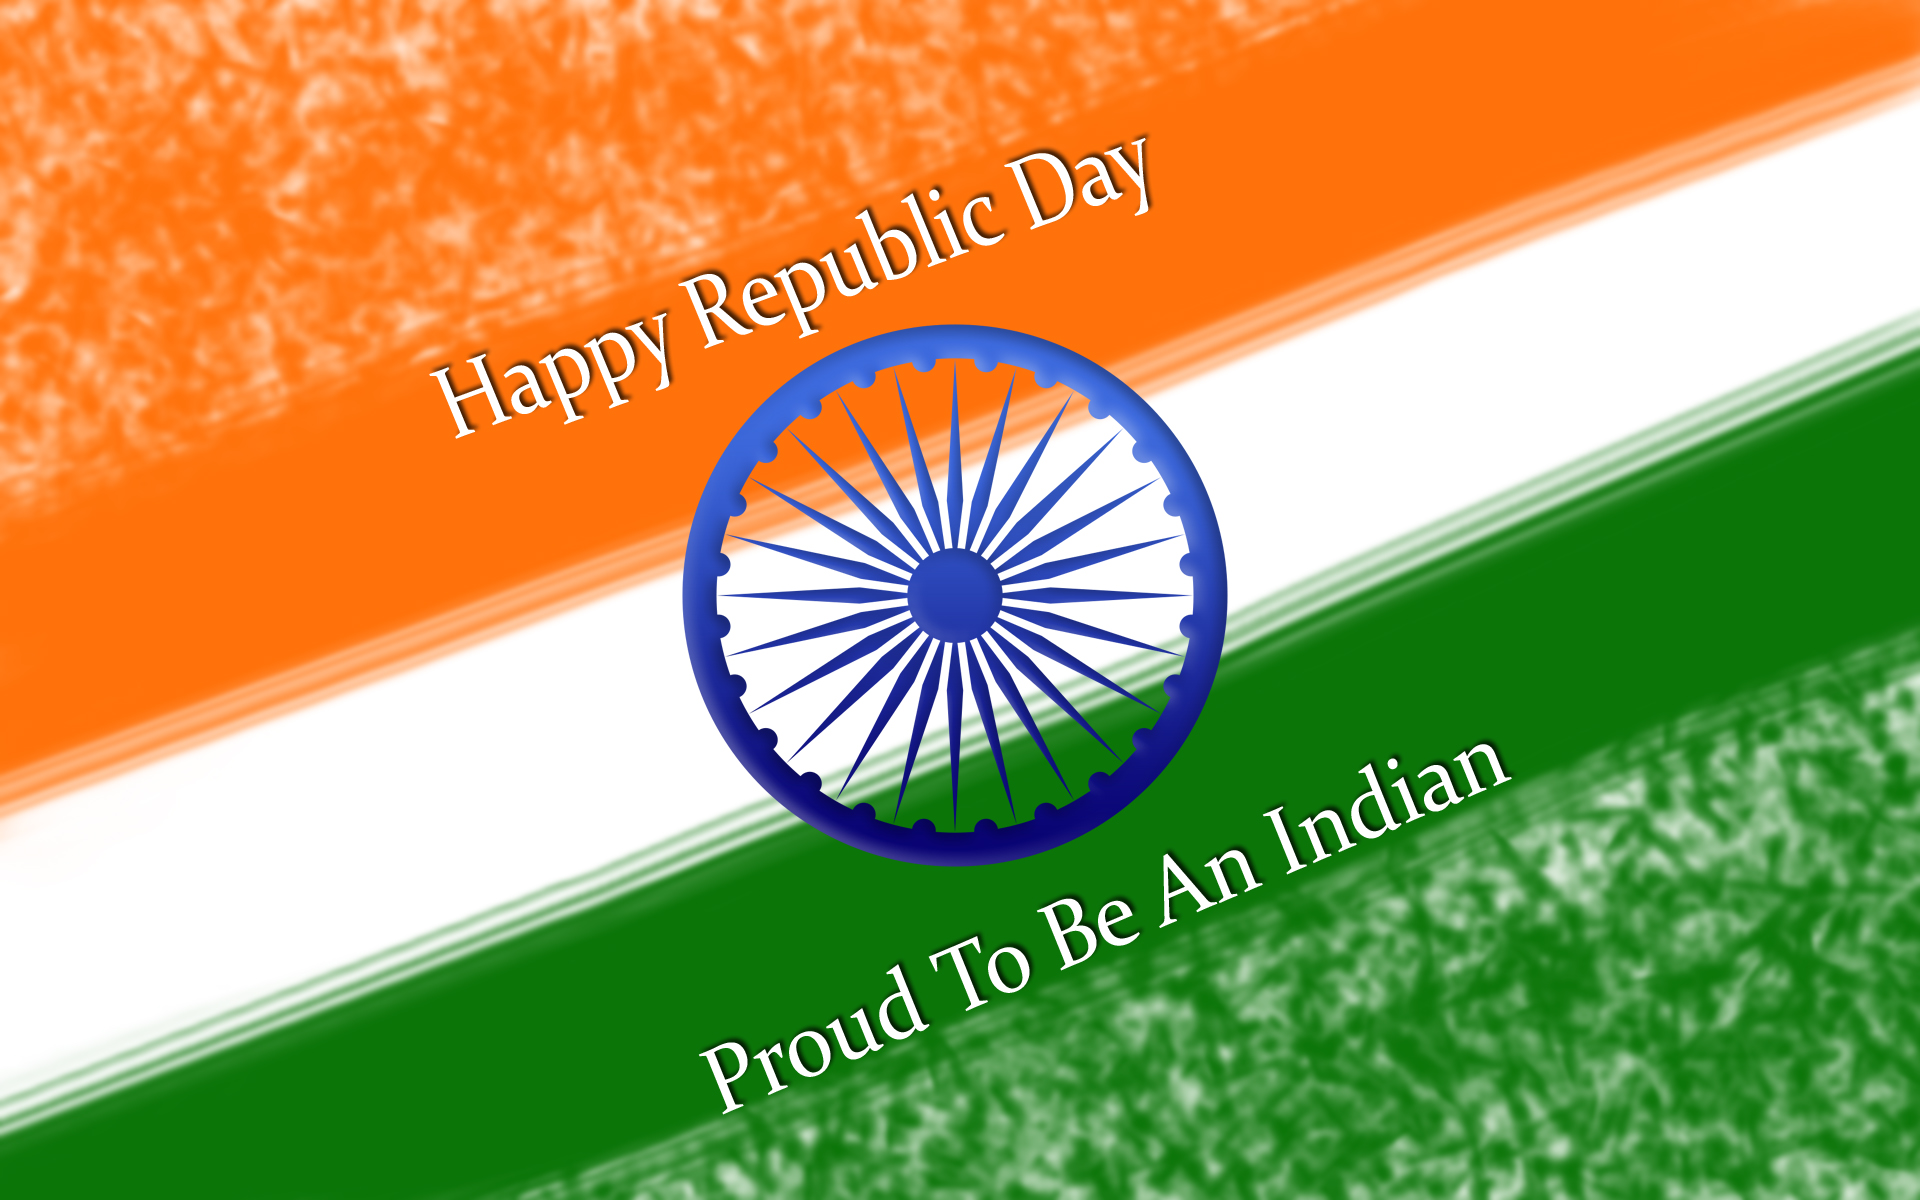 WISHING A VERY HAPPY 67th REPUBLIC DAY TO ALL MY COUNTRYMEN.